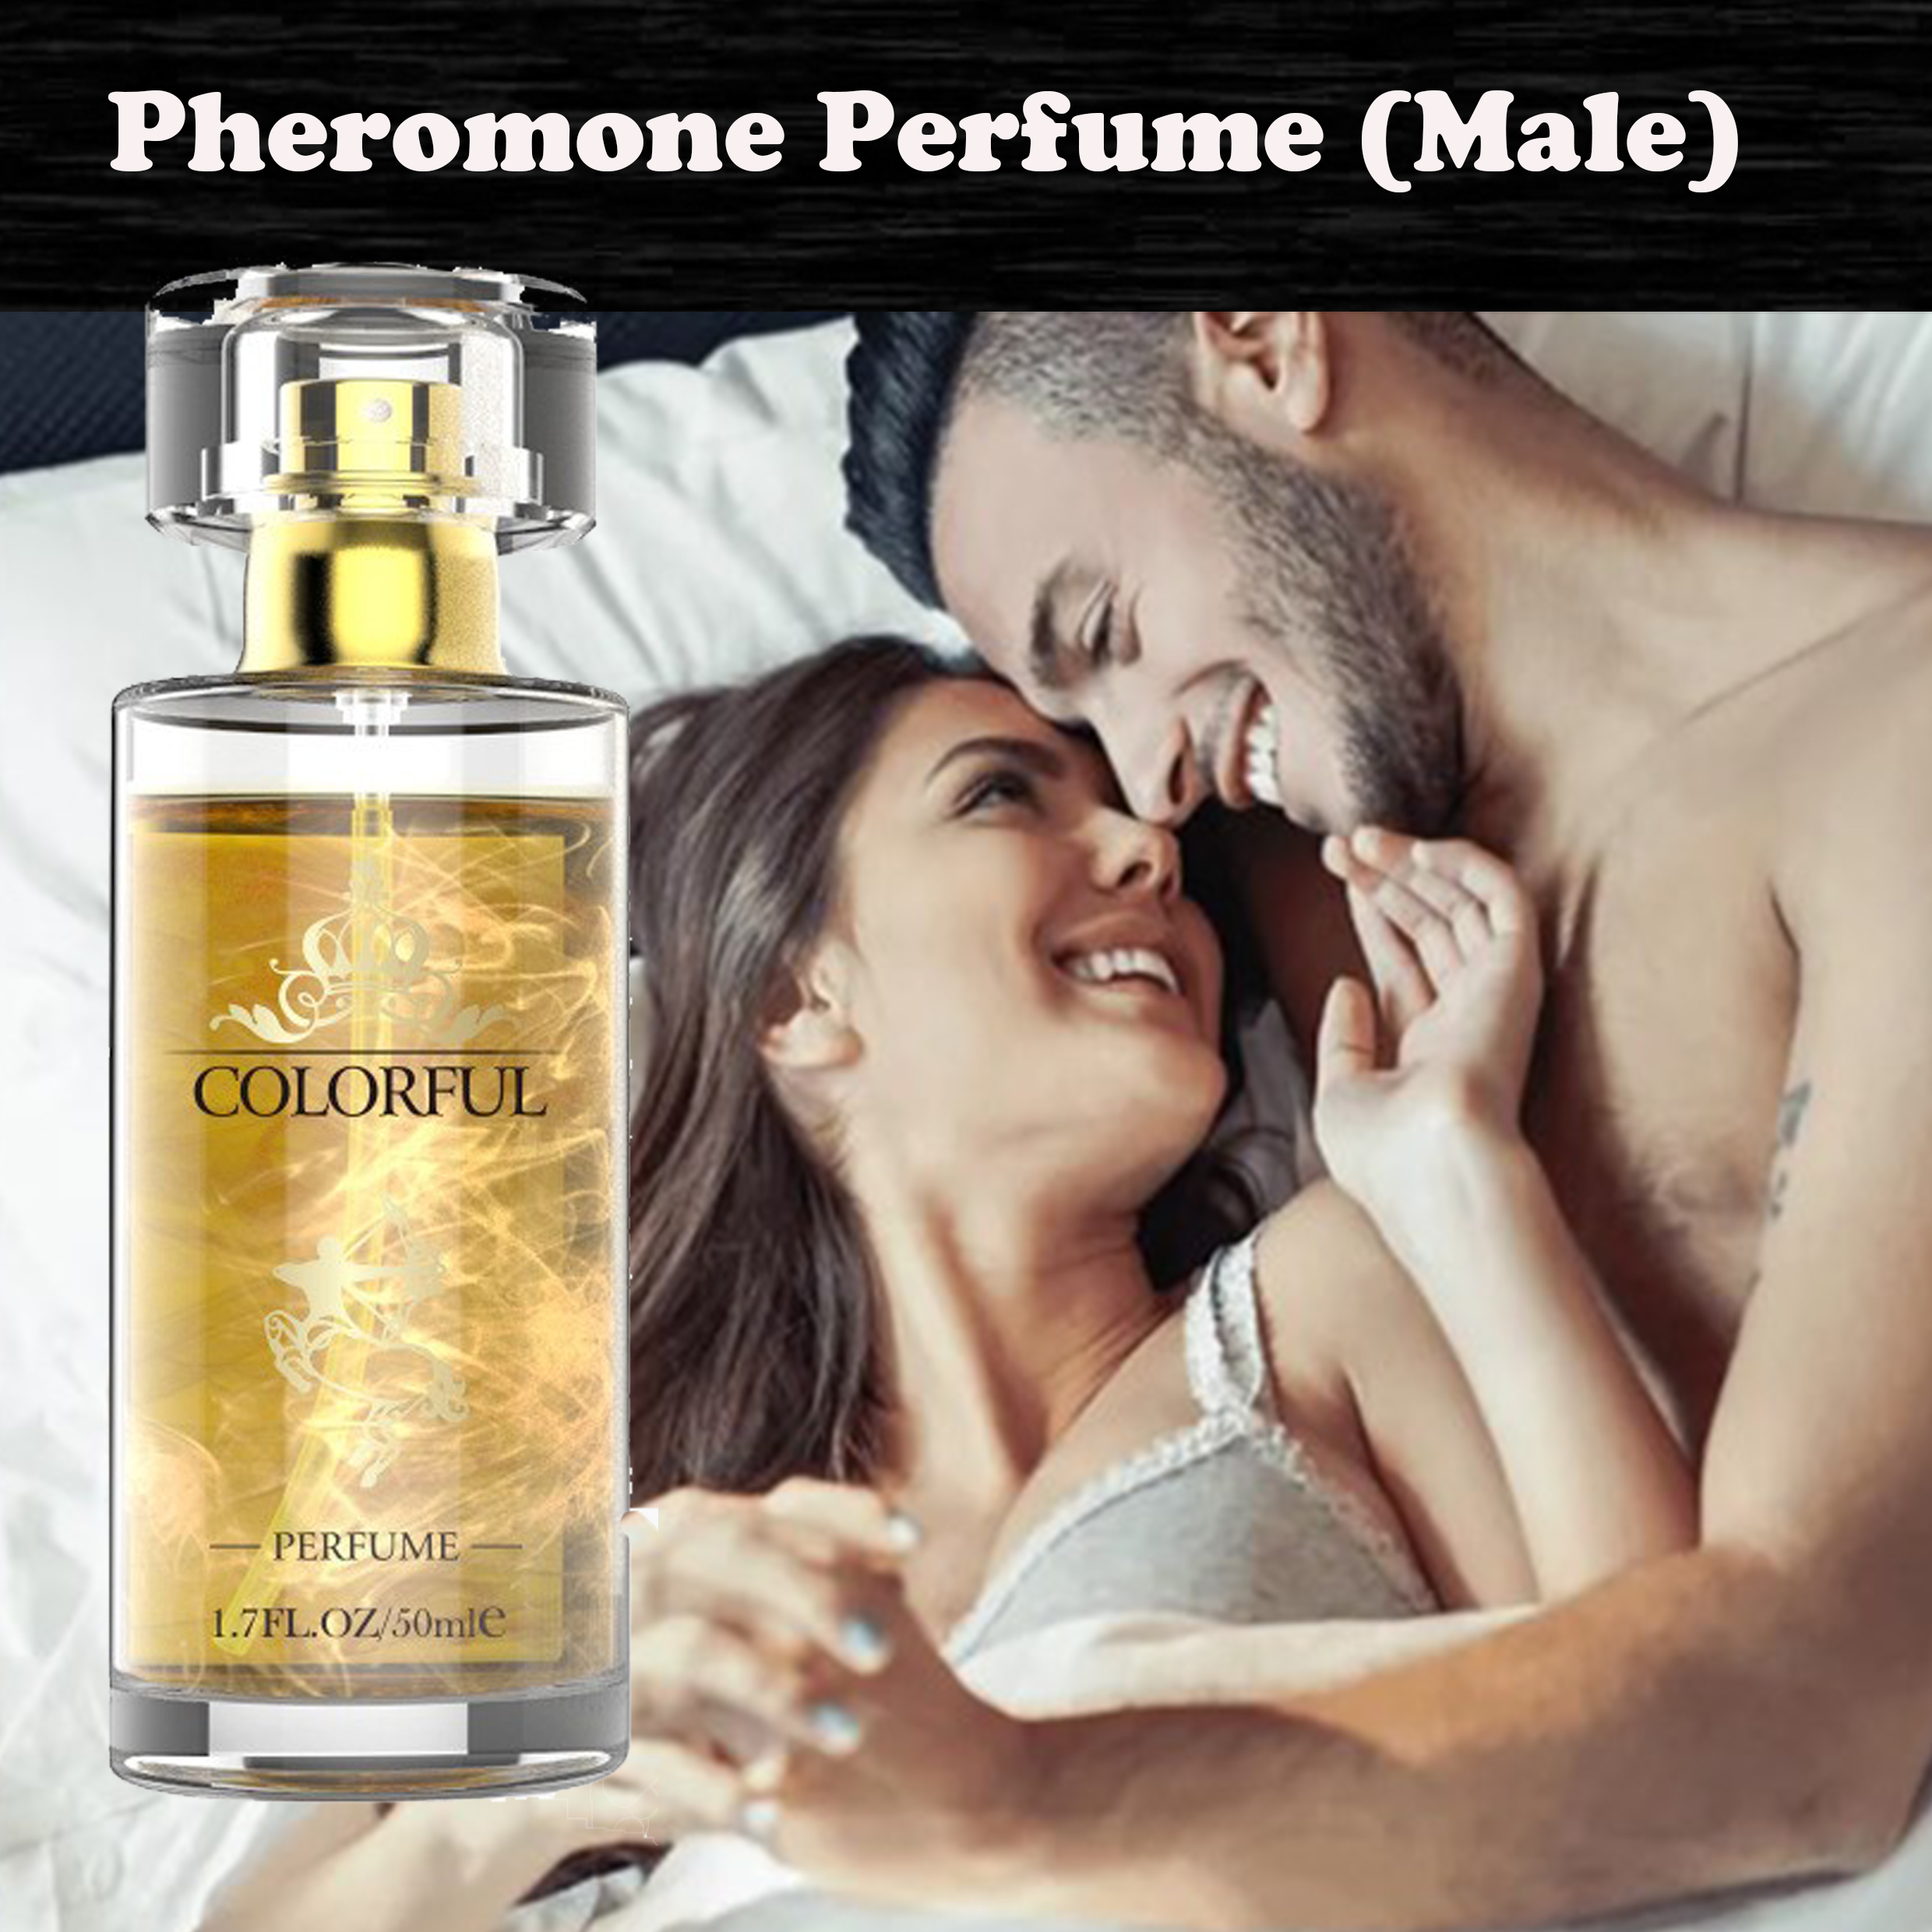 PheroStrong by Night Perfume with Pheromones for Men 50ml